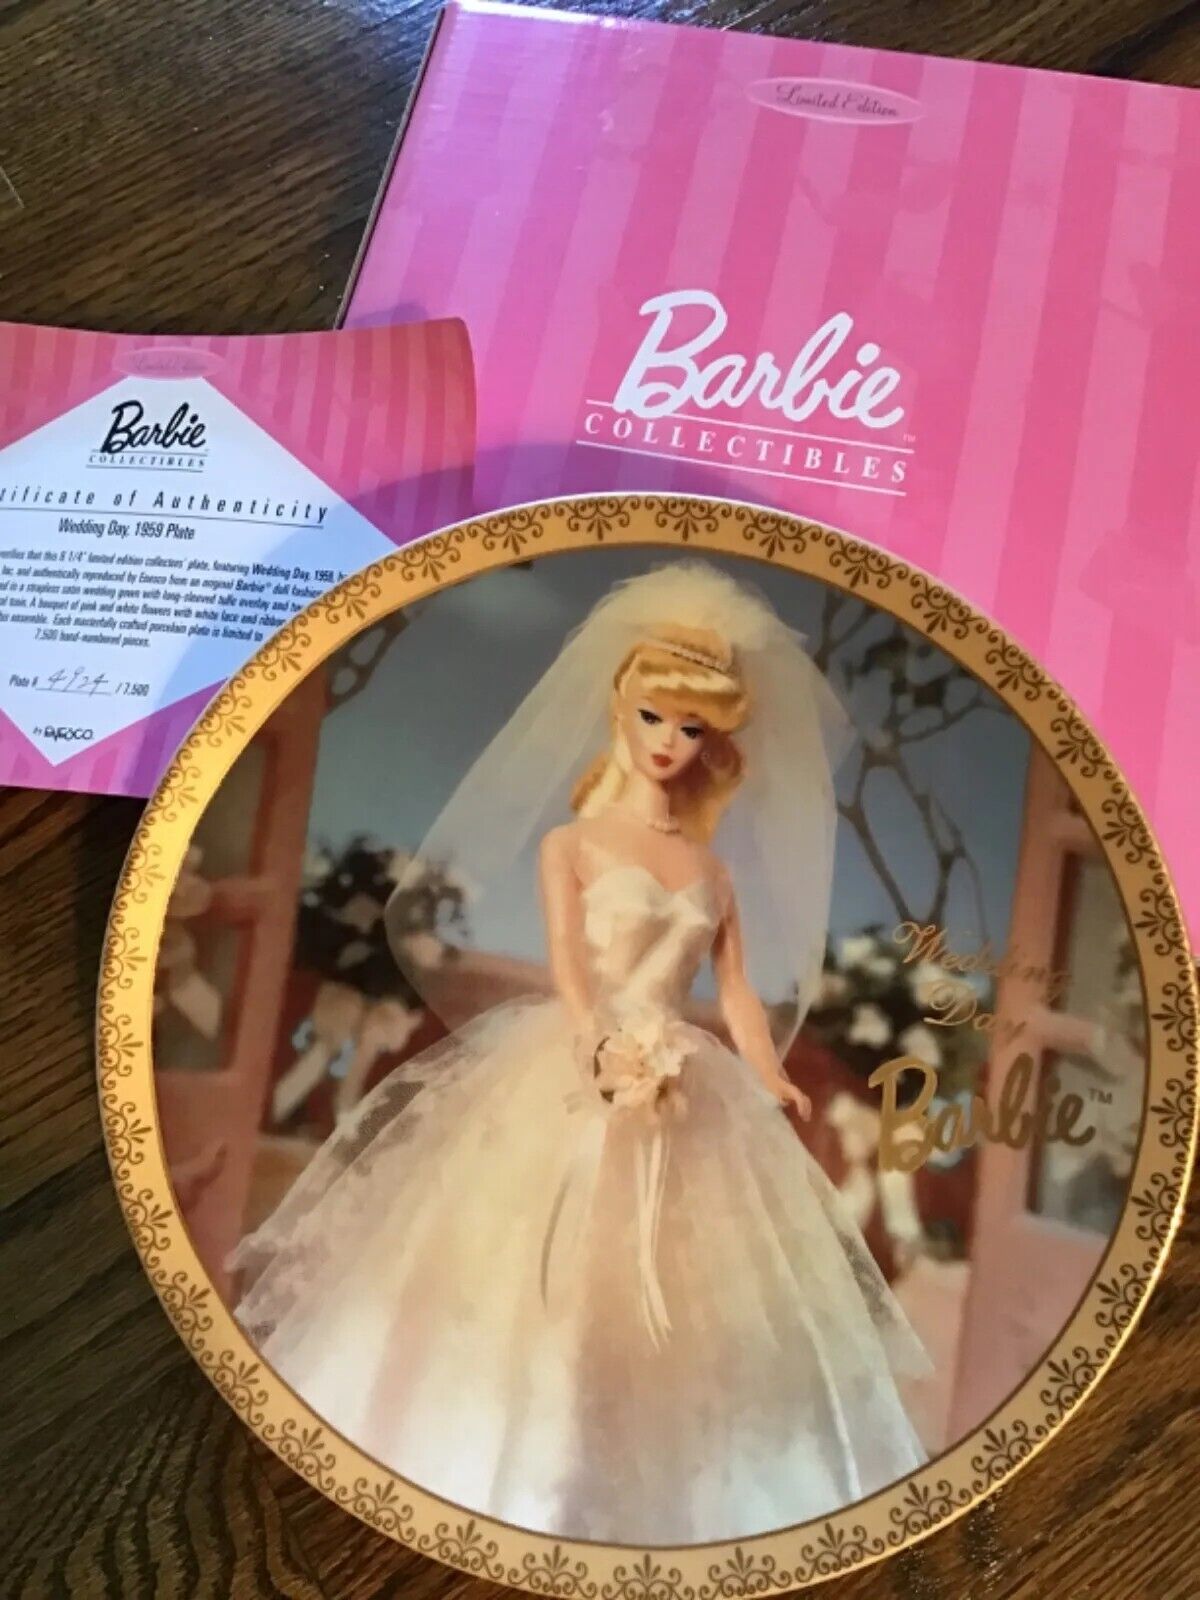 Barbie Wedding Day 1959 Bride Collector Plate Limited Edition Enesco New In Box 